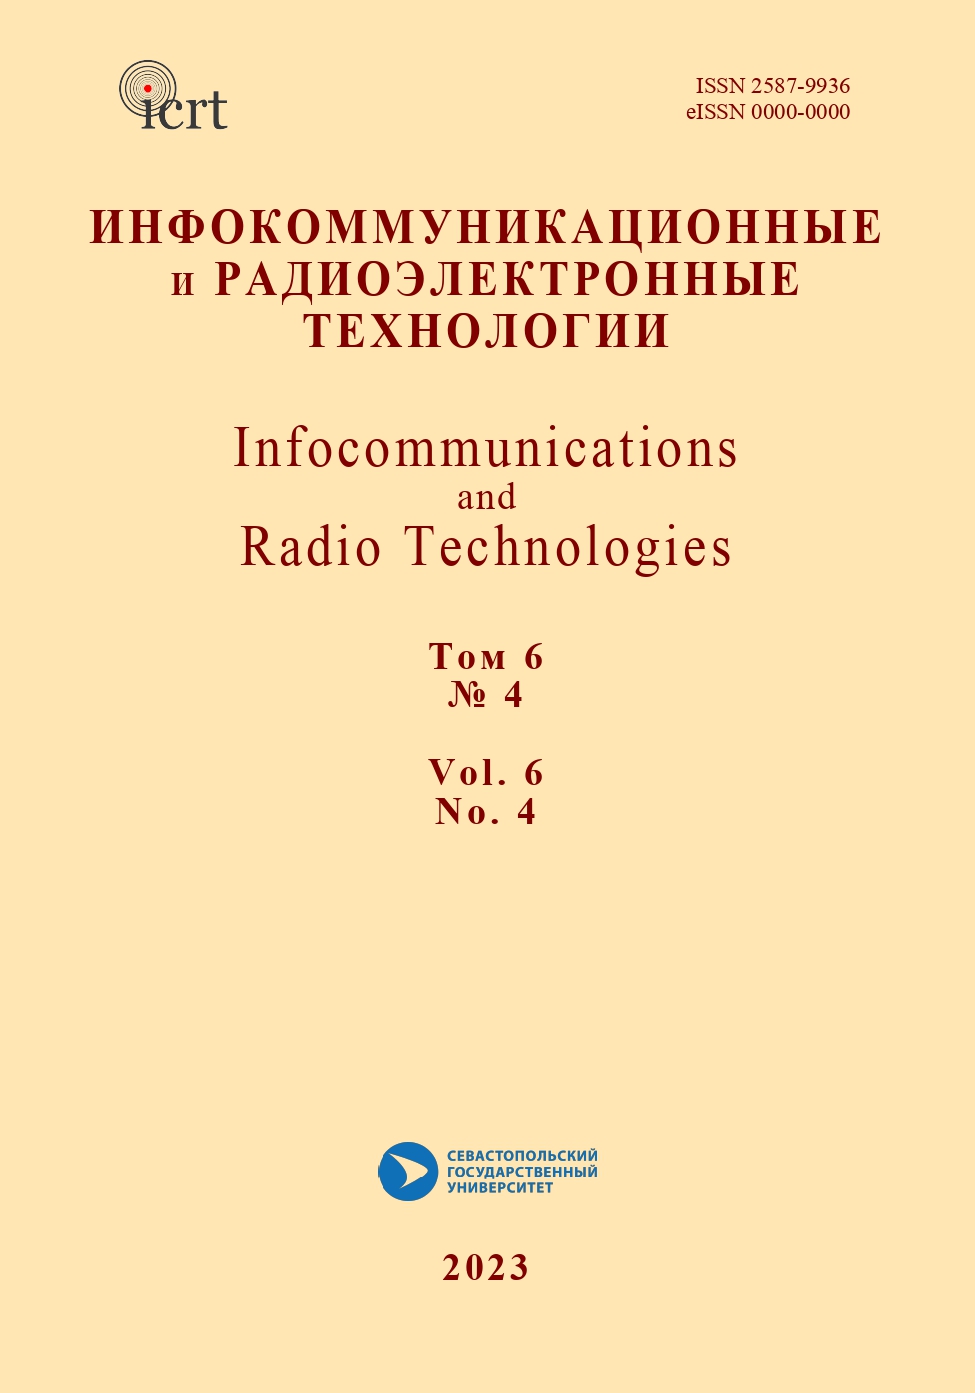                         Scientific Discoveries and Inventions  of Lee de Forest, which Contributed to the Progress in Radio Tube Technology and Social Development
            